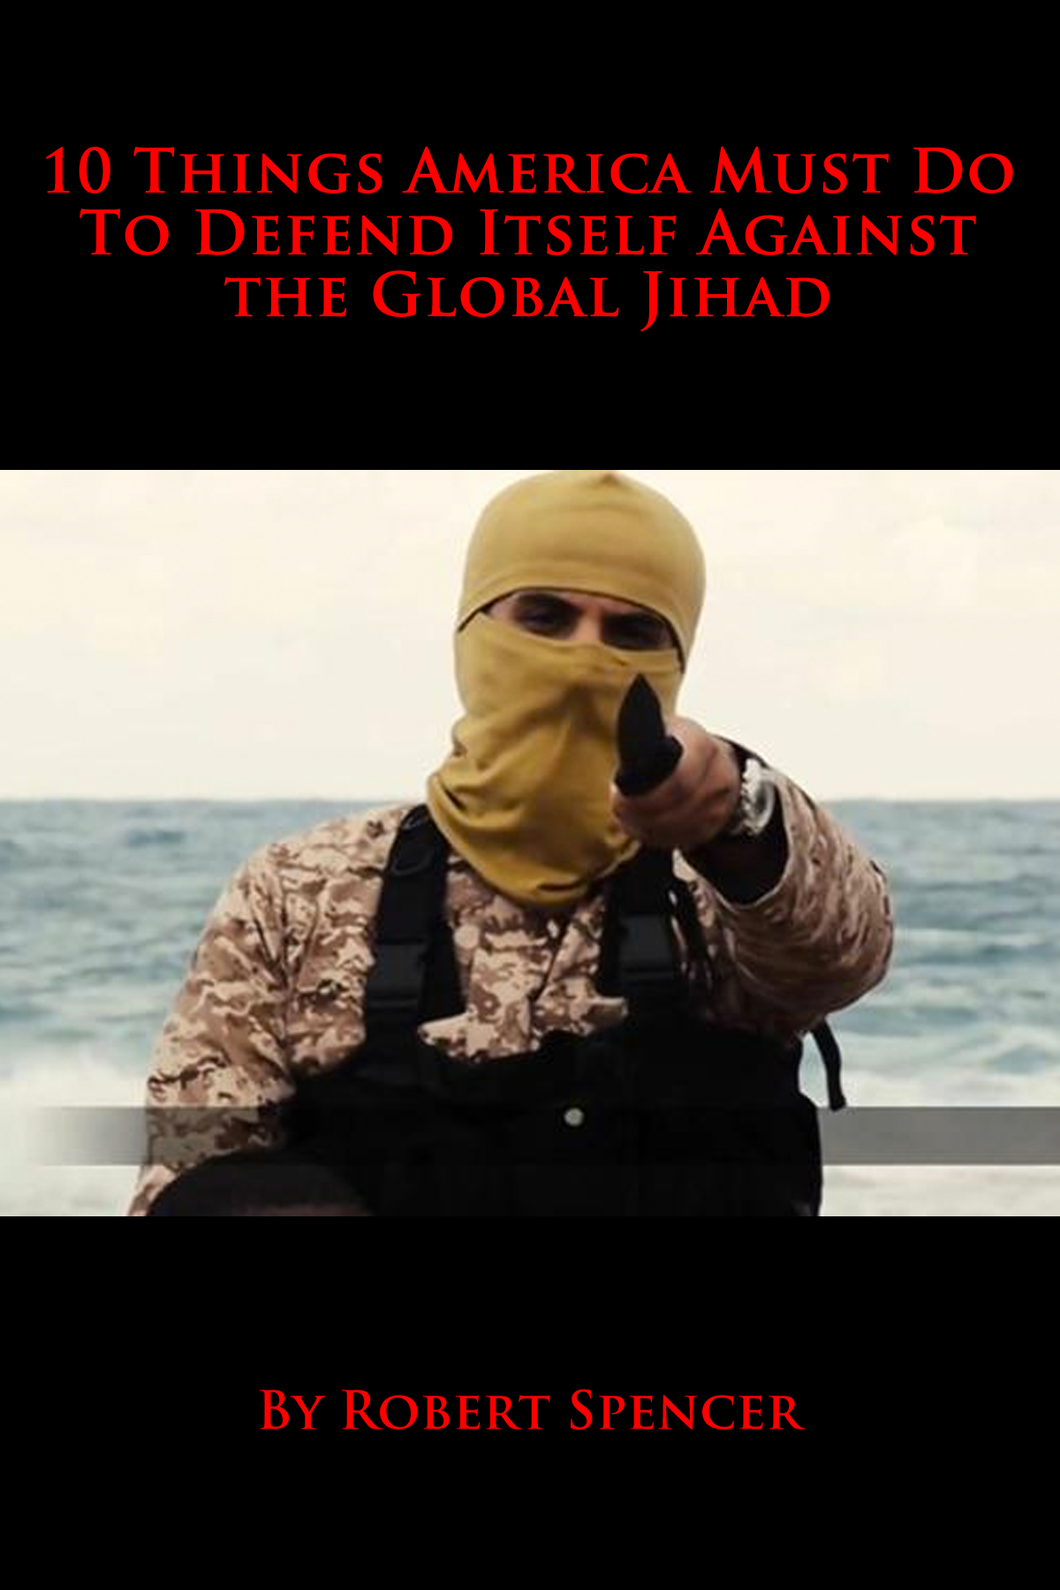 10 Things America Must Do To Defend Itself Against The Global Jihad